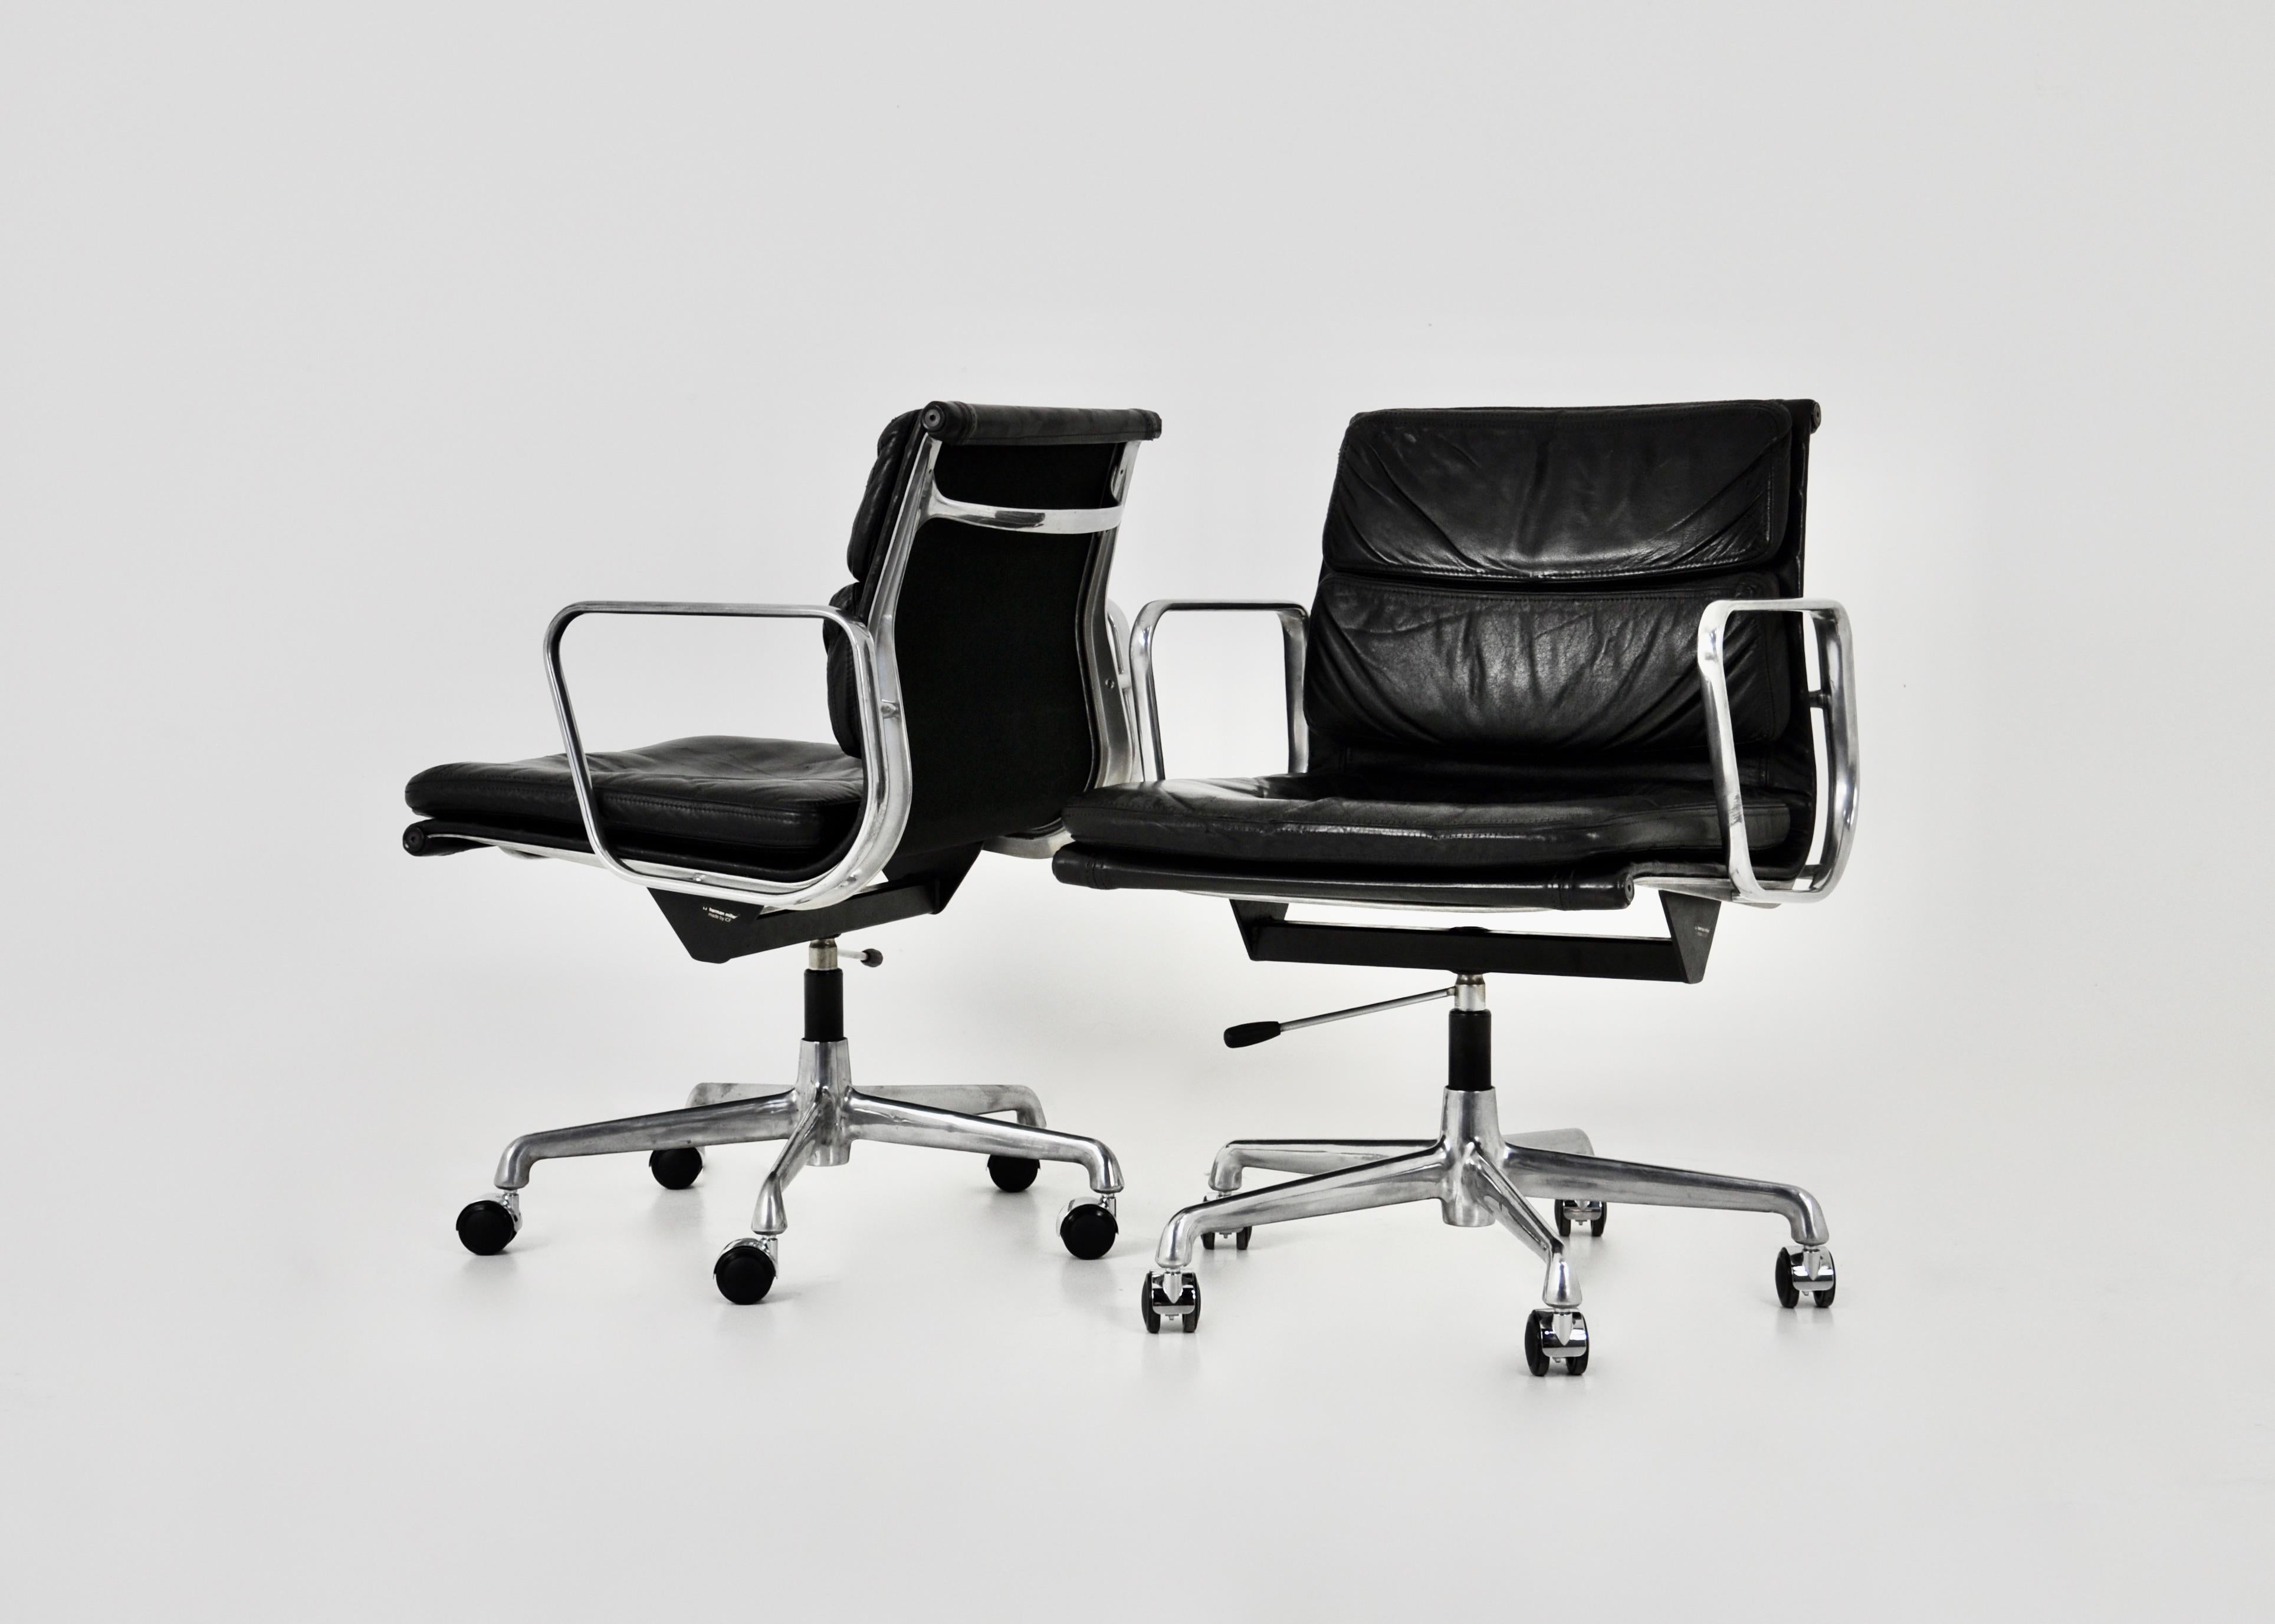 Black leather chair with aluminium base and wheels. Swivels on itself and is height-adjustable. Minimum seat height 47 cm, maximum seat height 54 cm. Maximum total height of the chair: 87 cm. Stamped Herman Miller. Wear due to age and age of the